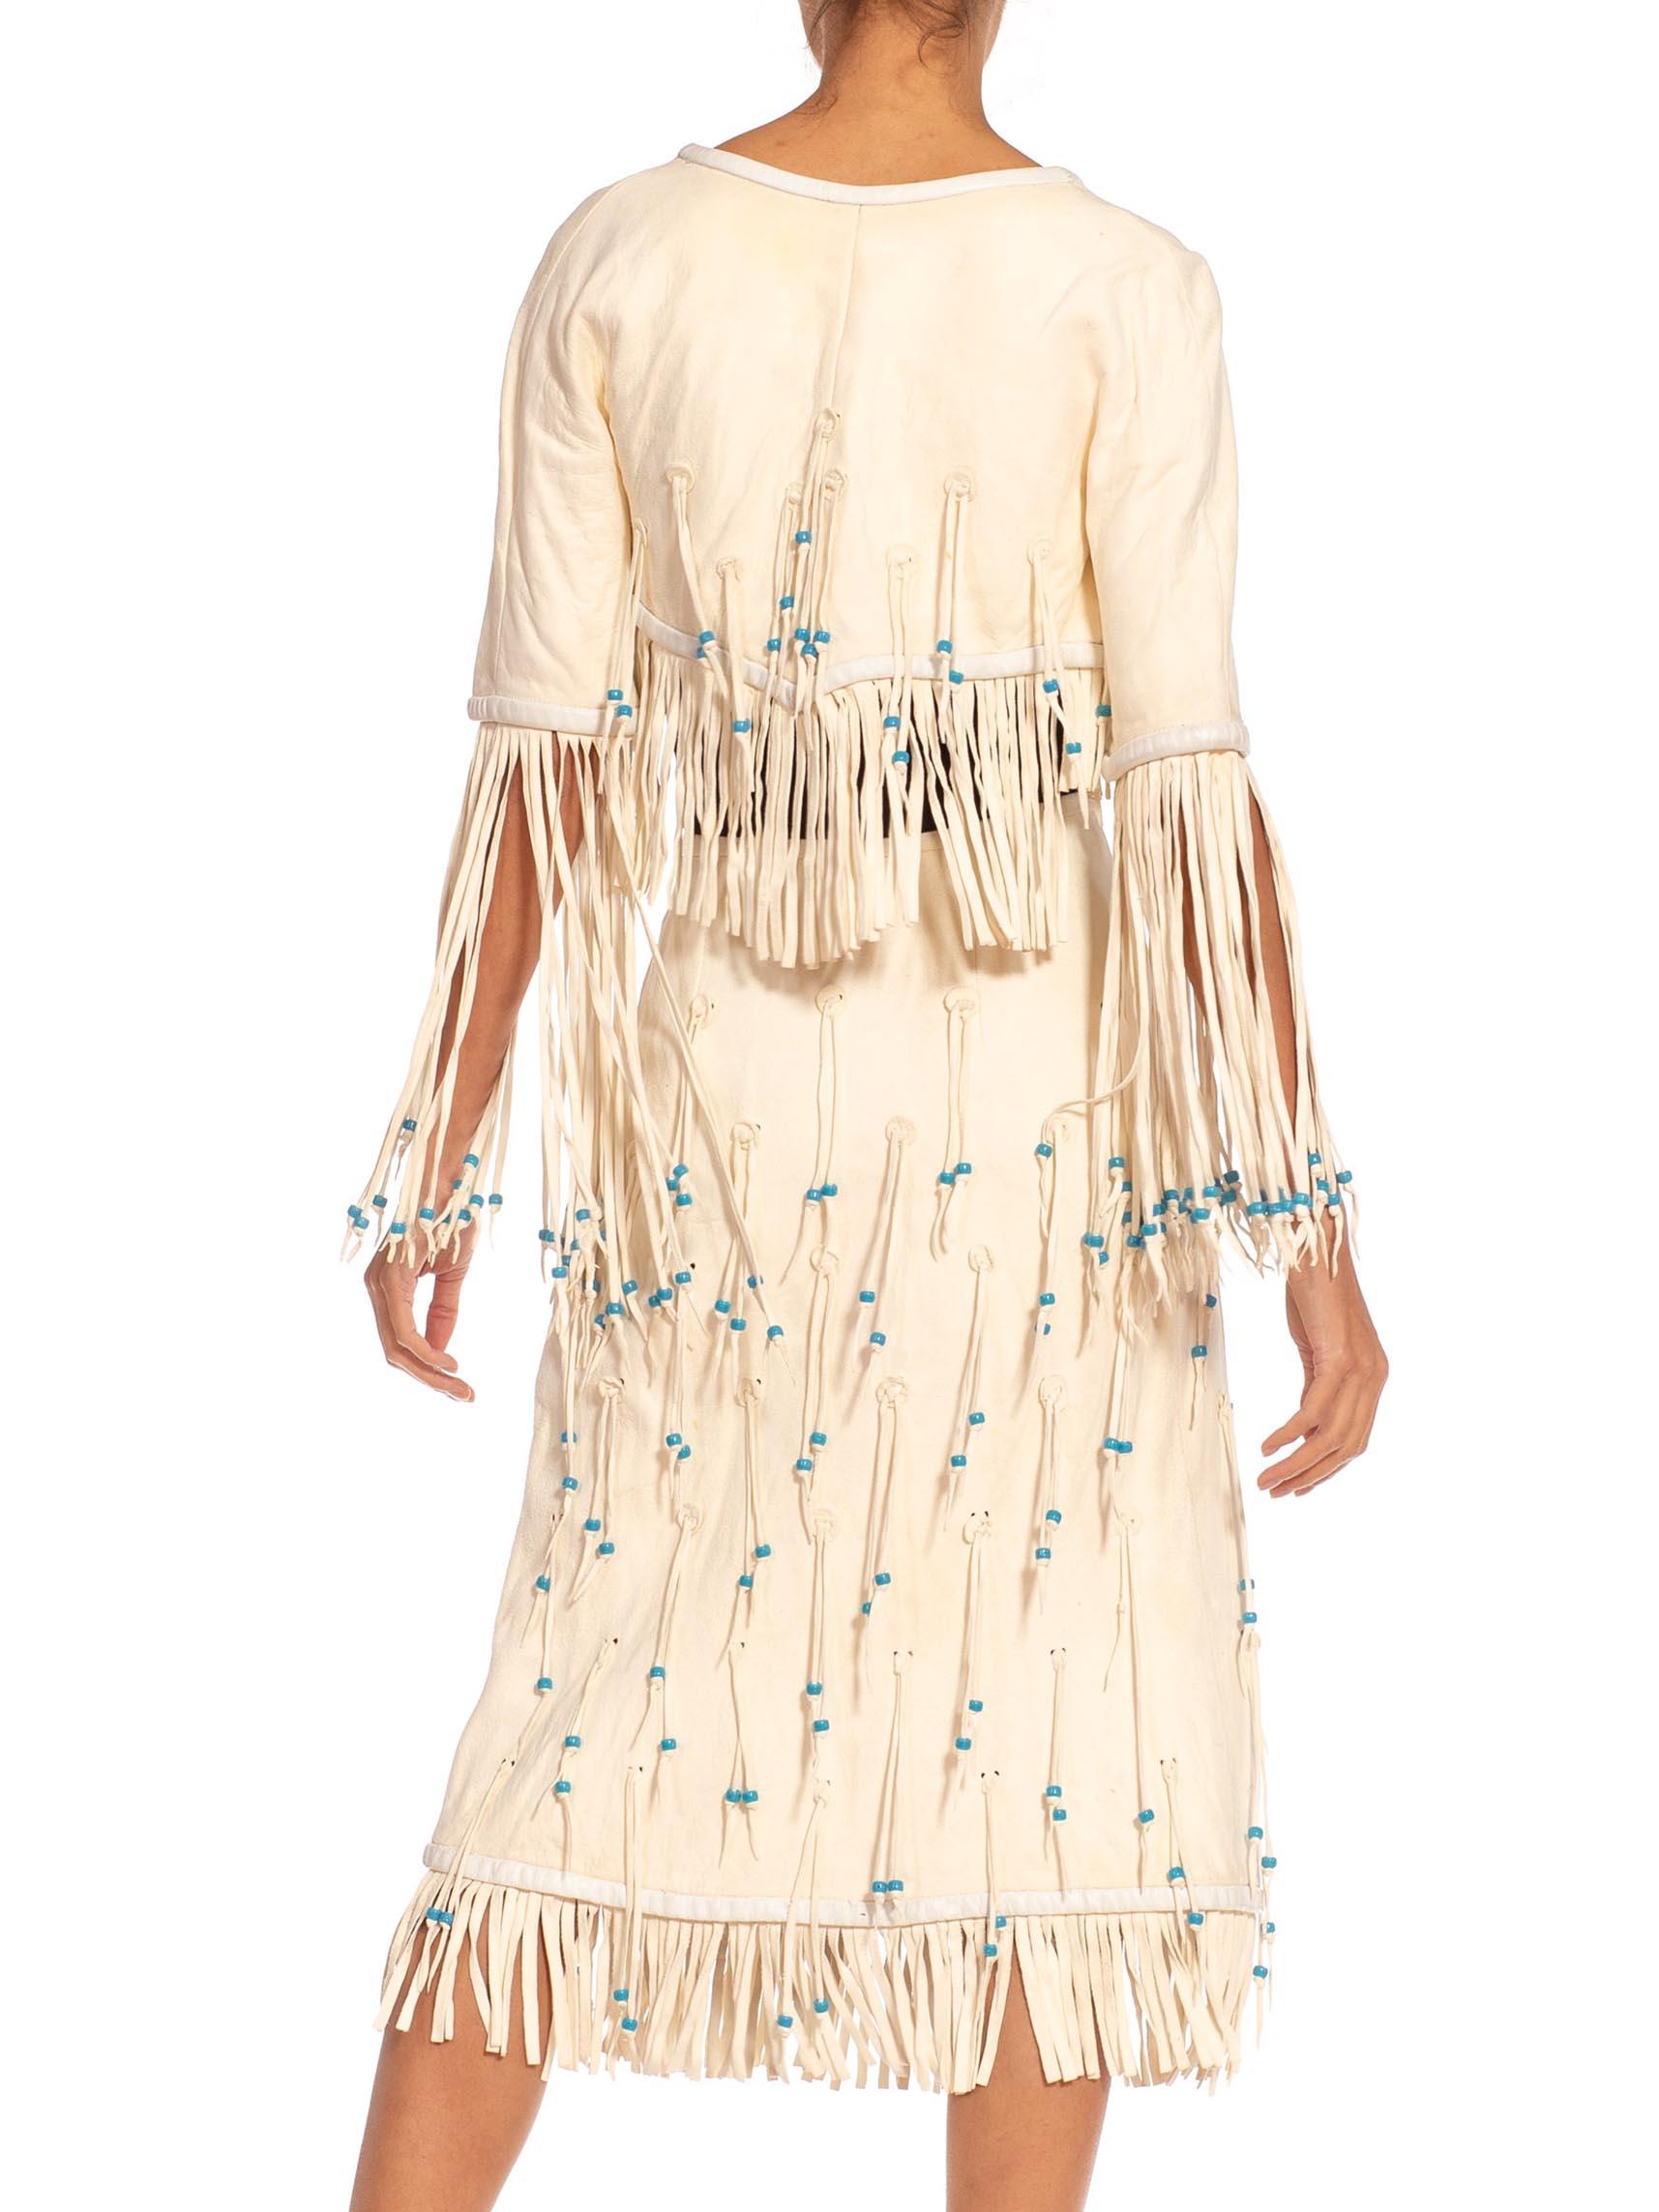 1970S GEORGIO SANT'angelo White & Blue Leather Suede Beaded Fringe Jacket Skirt For Sale 1